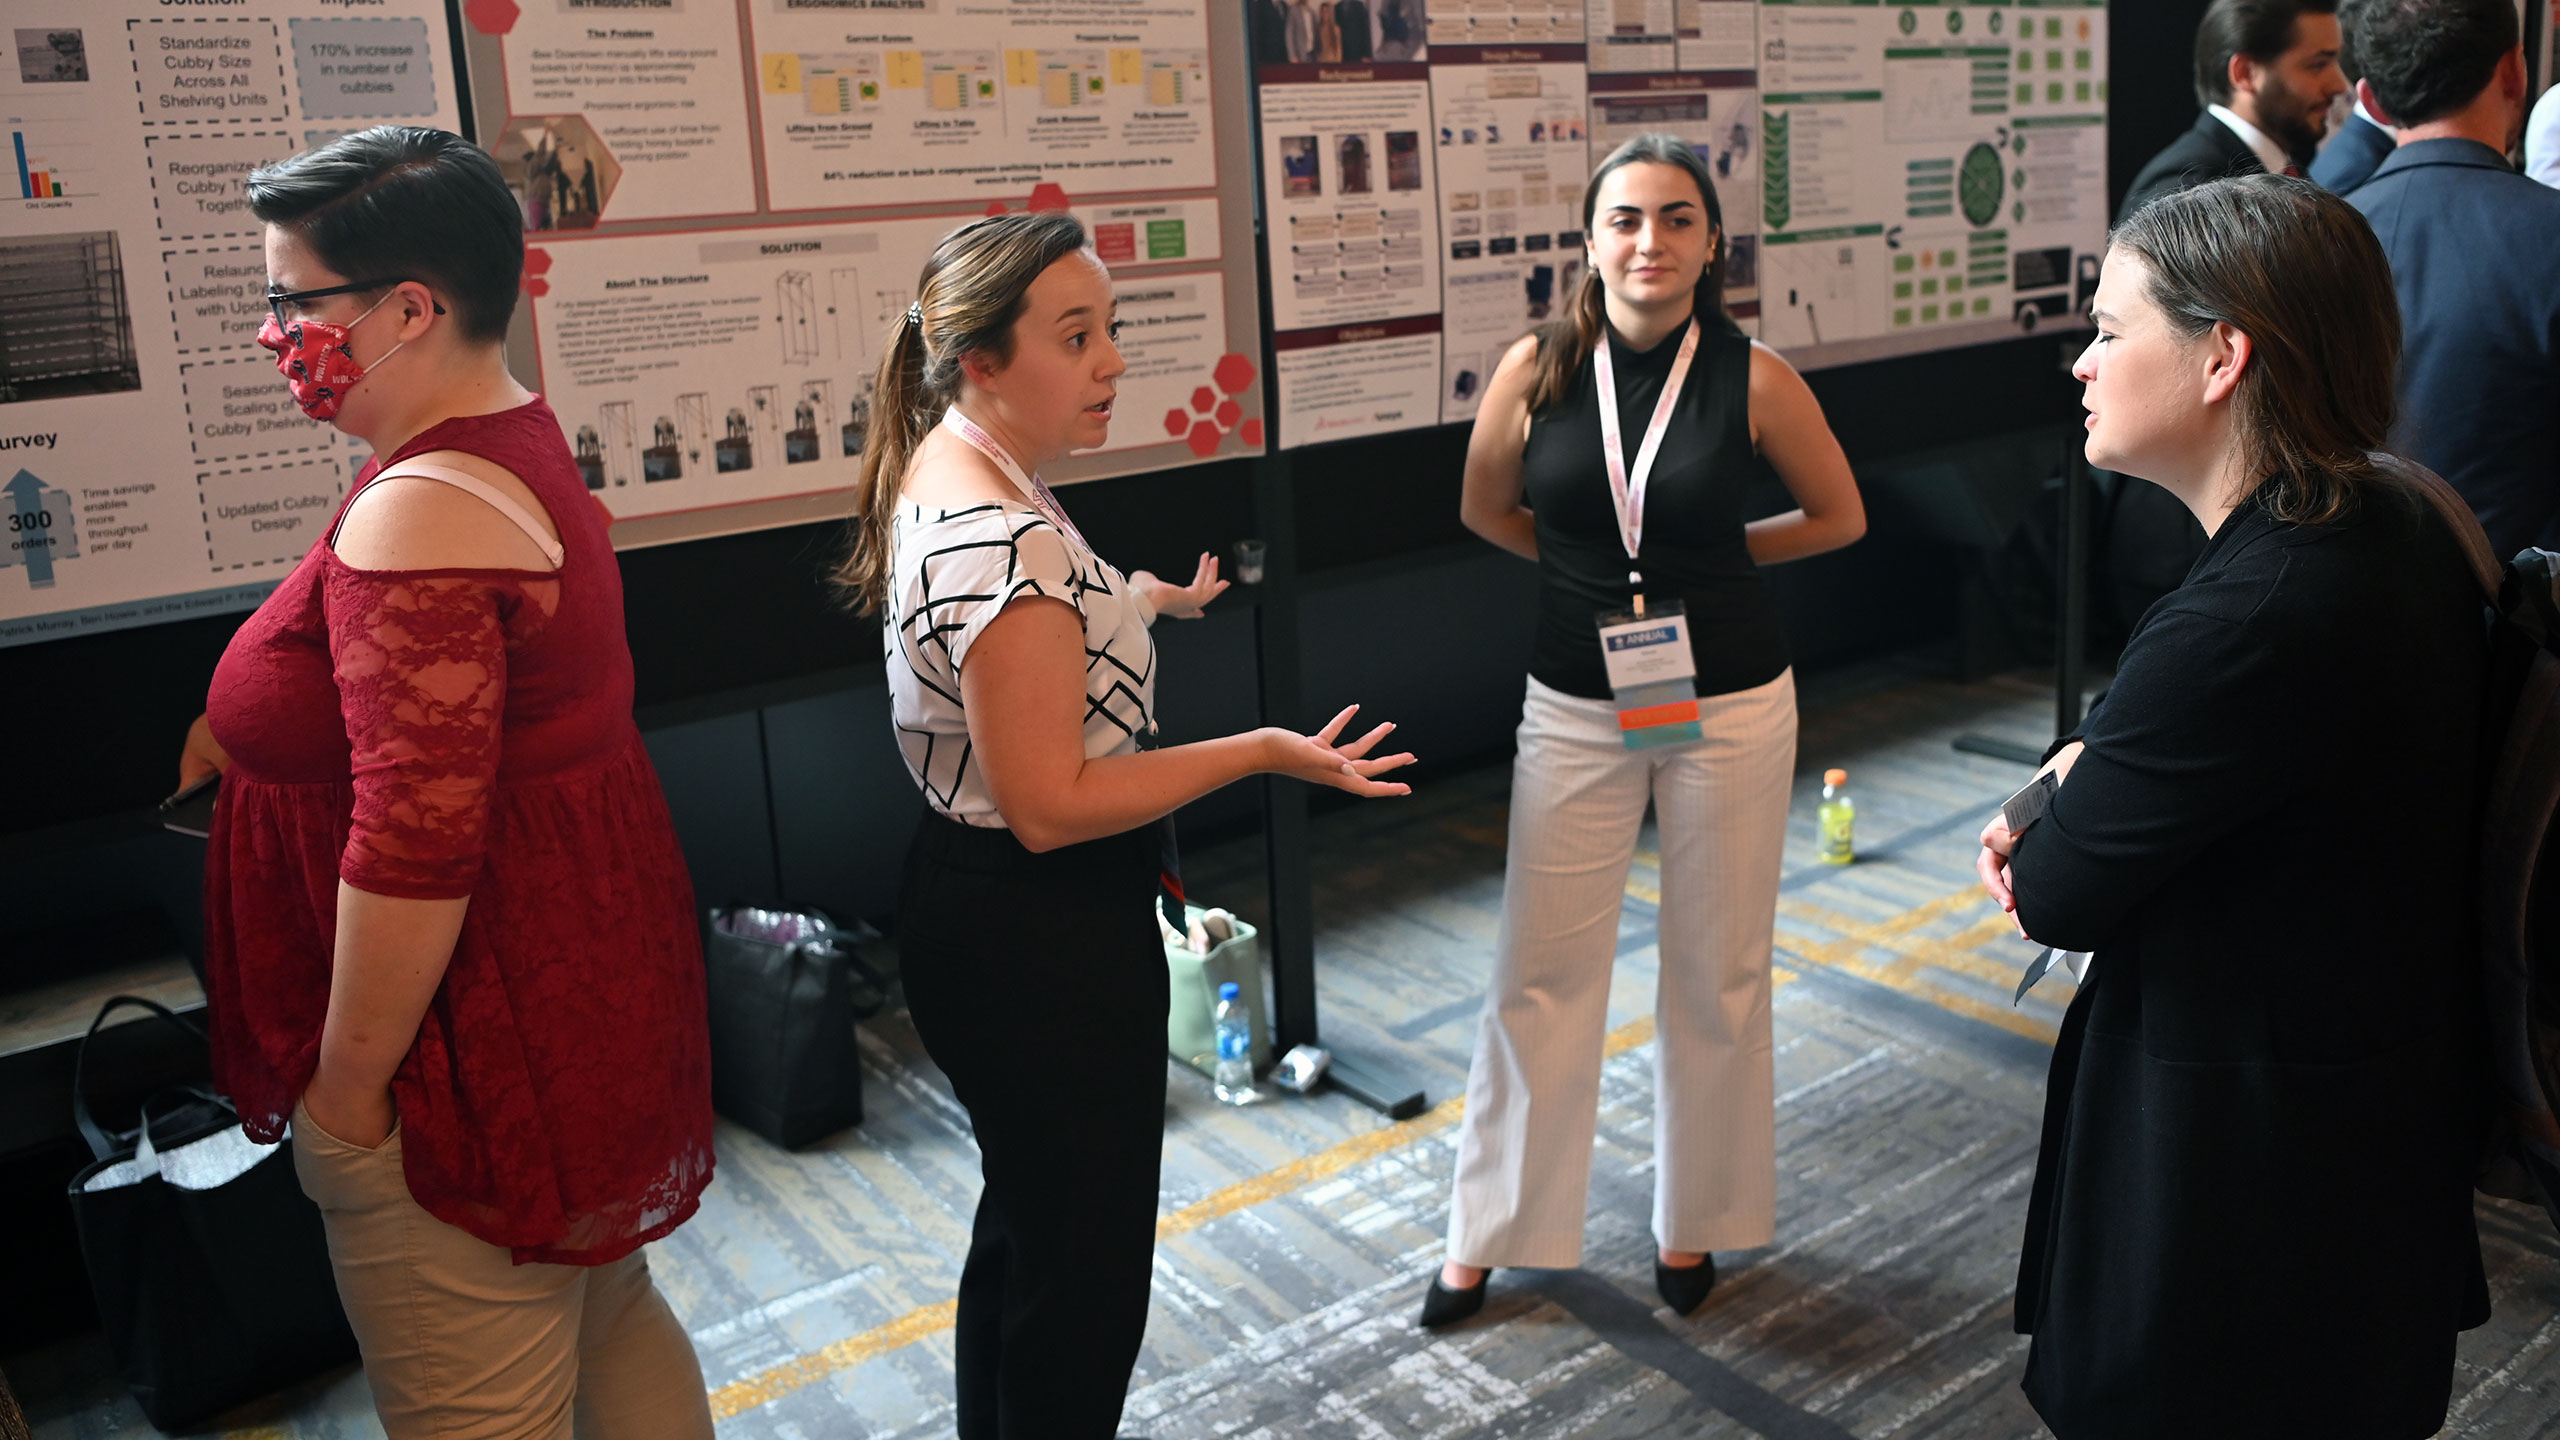 Rachel Boswell and Alyssa SaidiZand talking to a spectator in front of their research poster